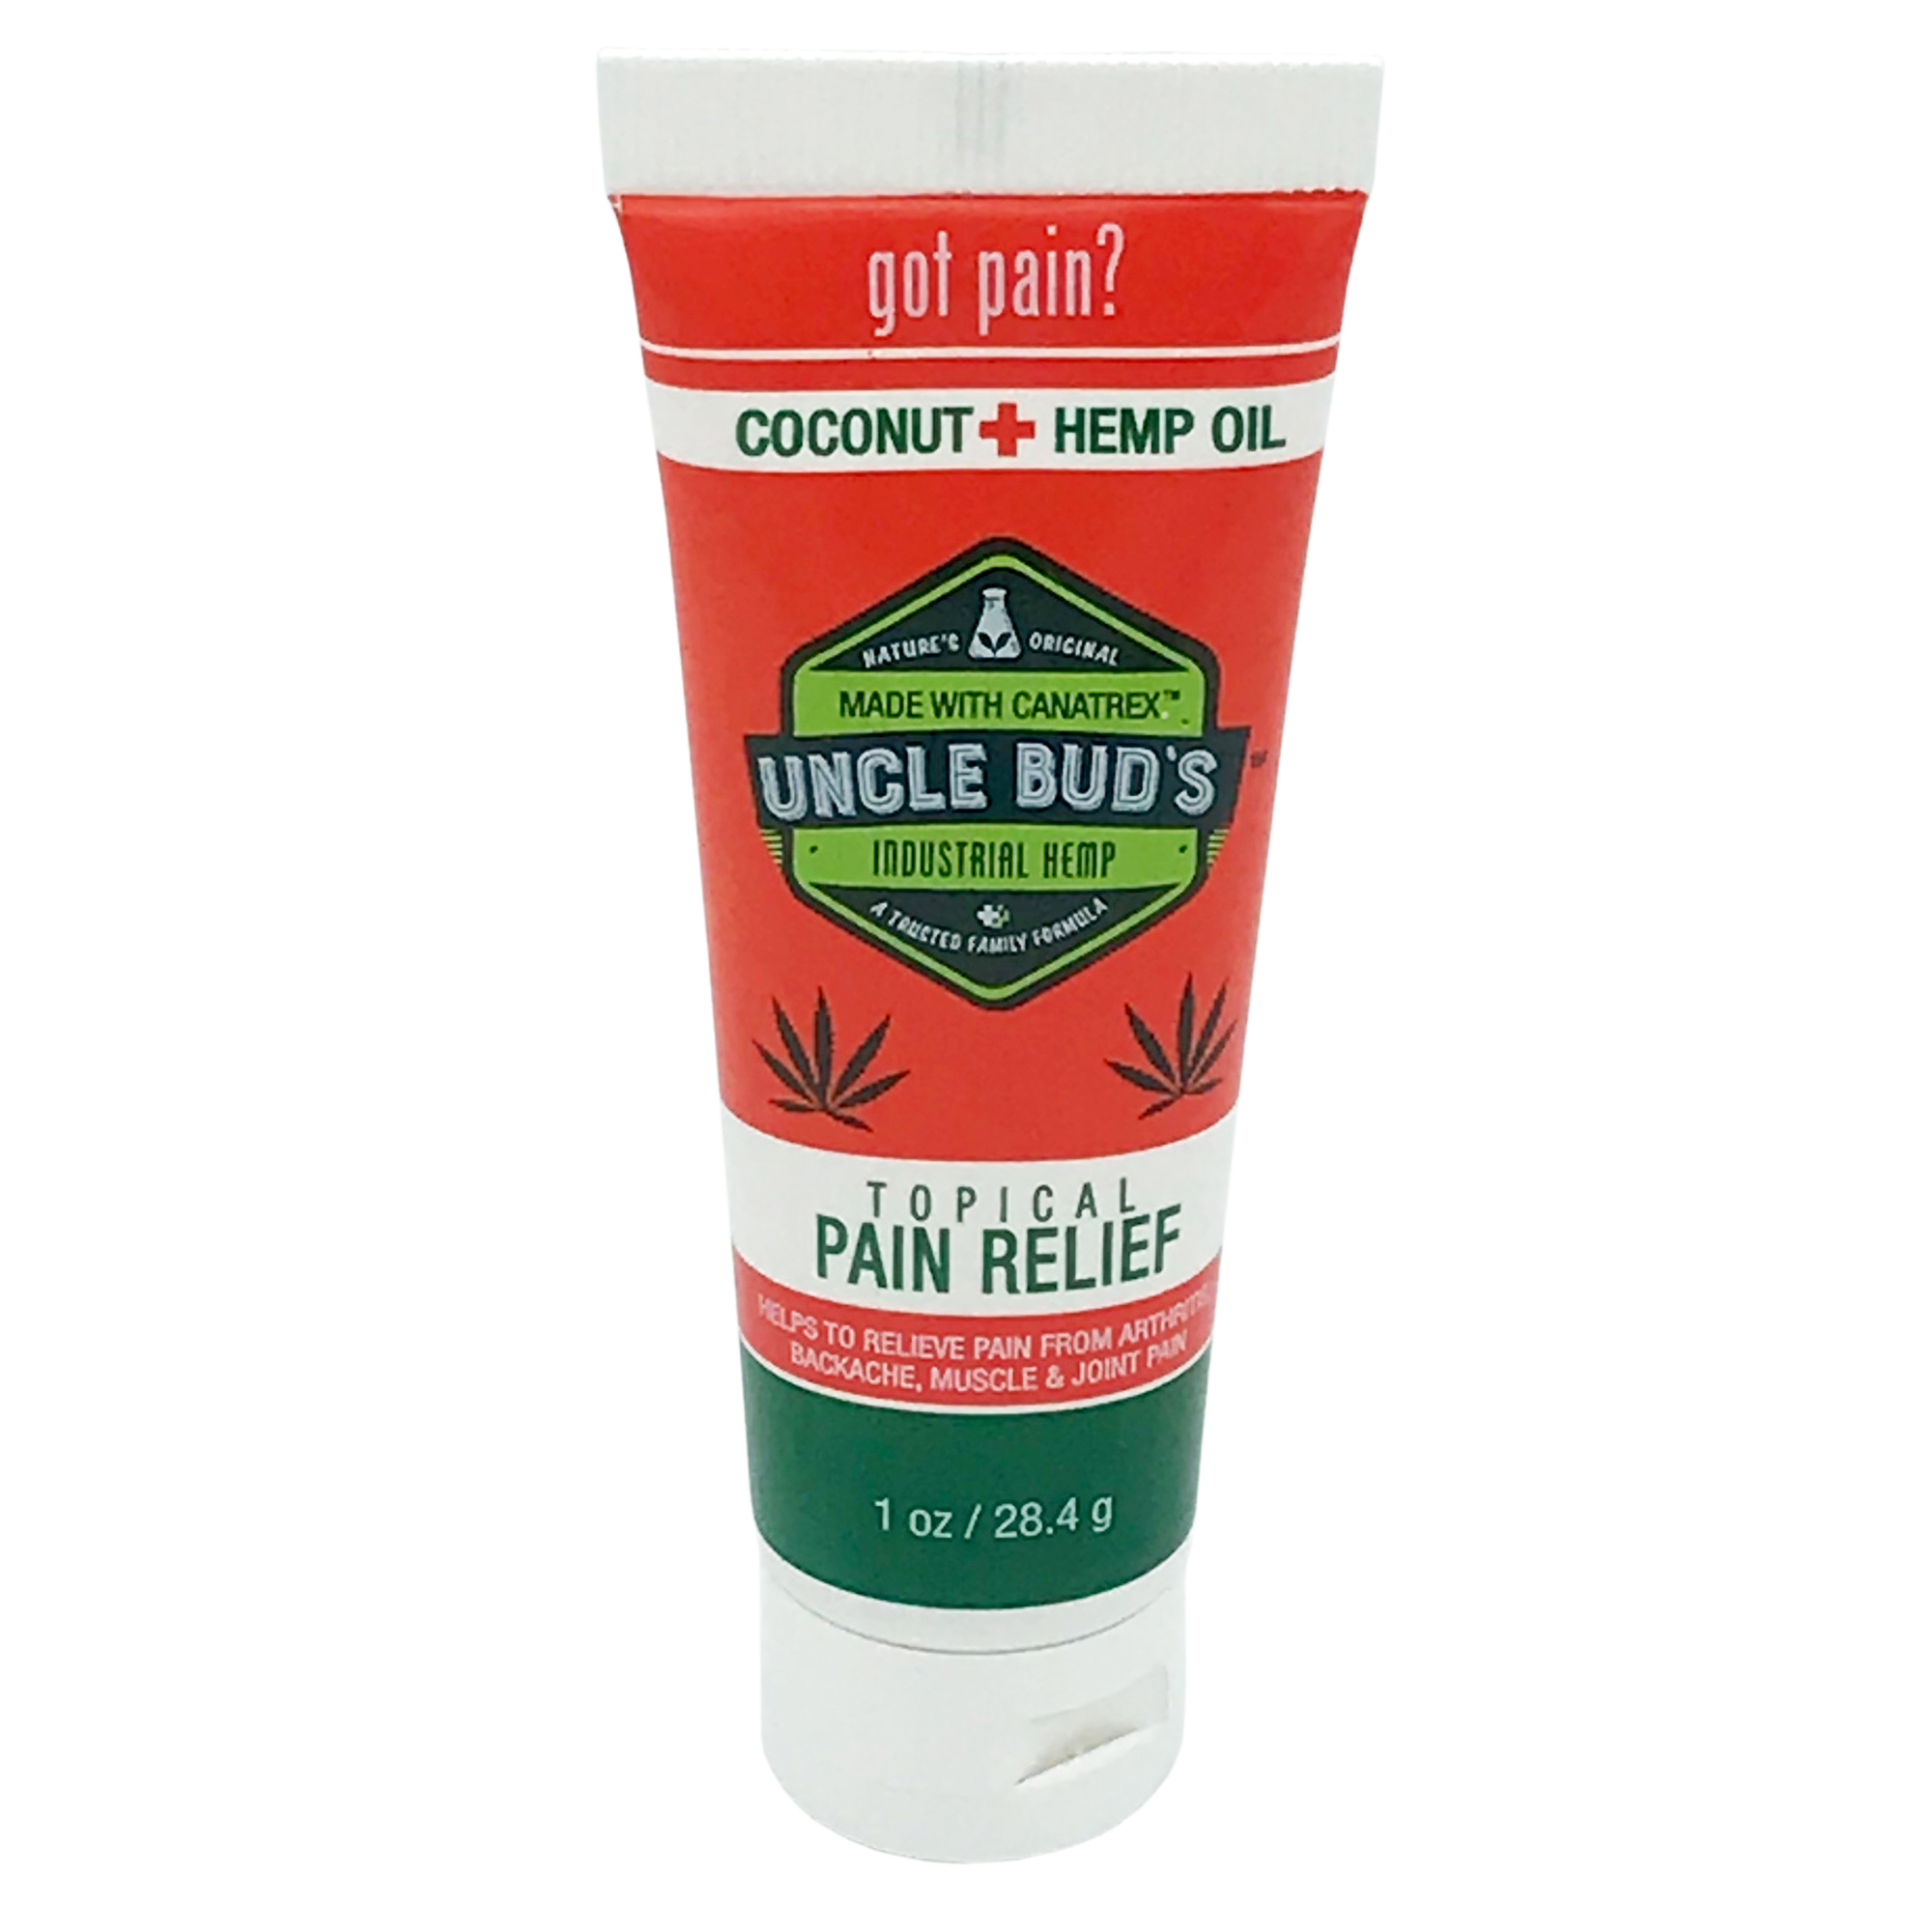 Uncle Bud's Hemp Topical Pain Reliever. This fast-acting pain reliever works faster, penetrates deeper and relieves aches and pains better than any other over-the-counter pain relief product on the market. $15.99